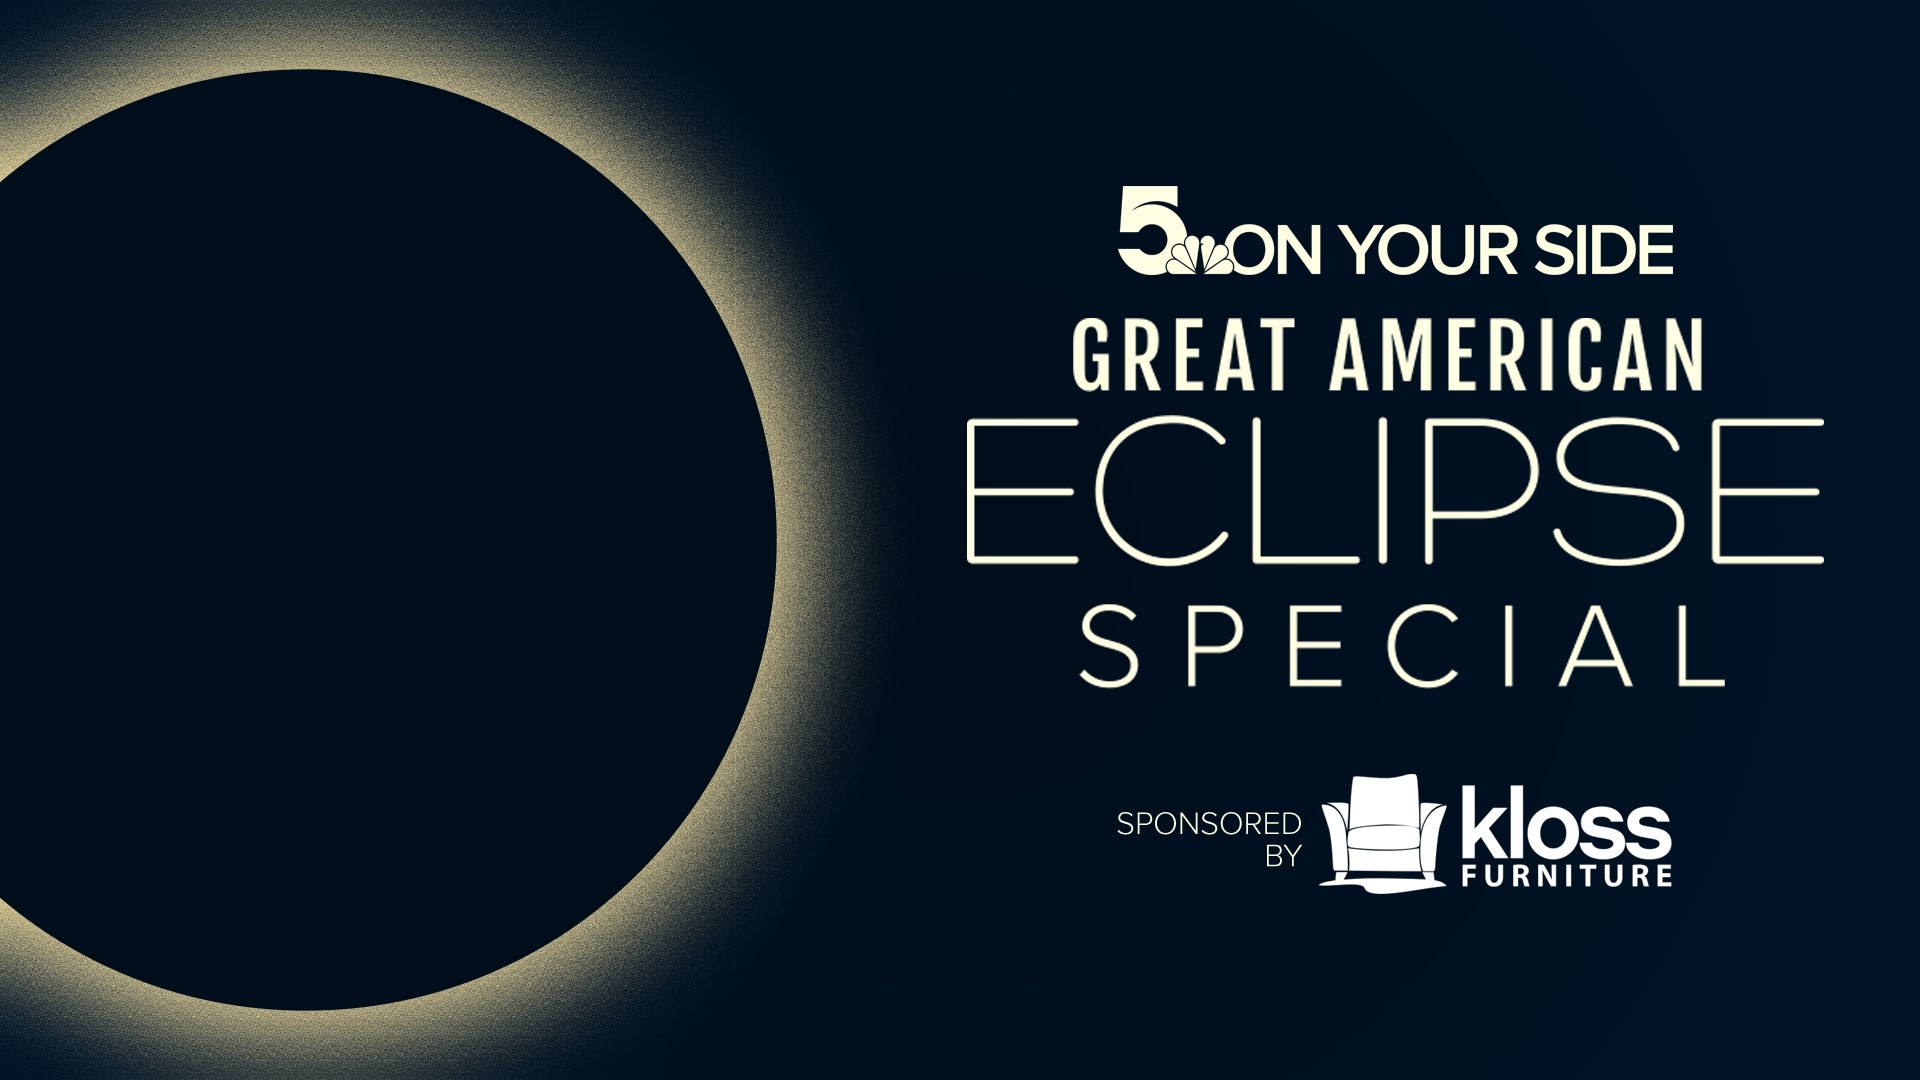 Join 5 On Your Side for coverage of the Great American Eclipse from several locations in Missouri and Illinois.